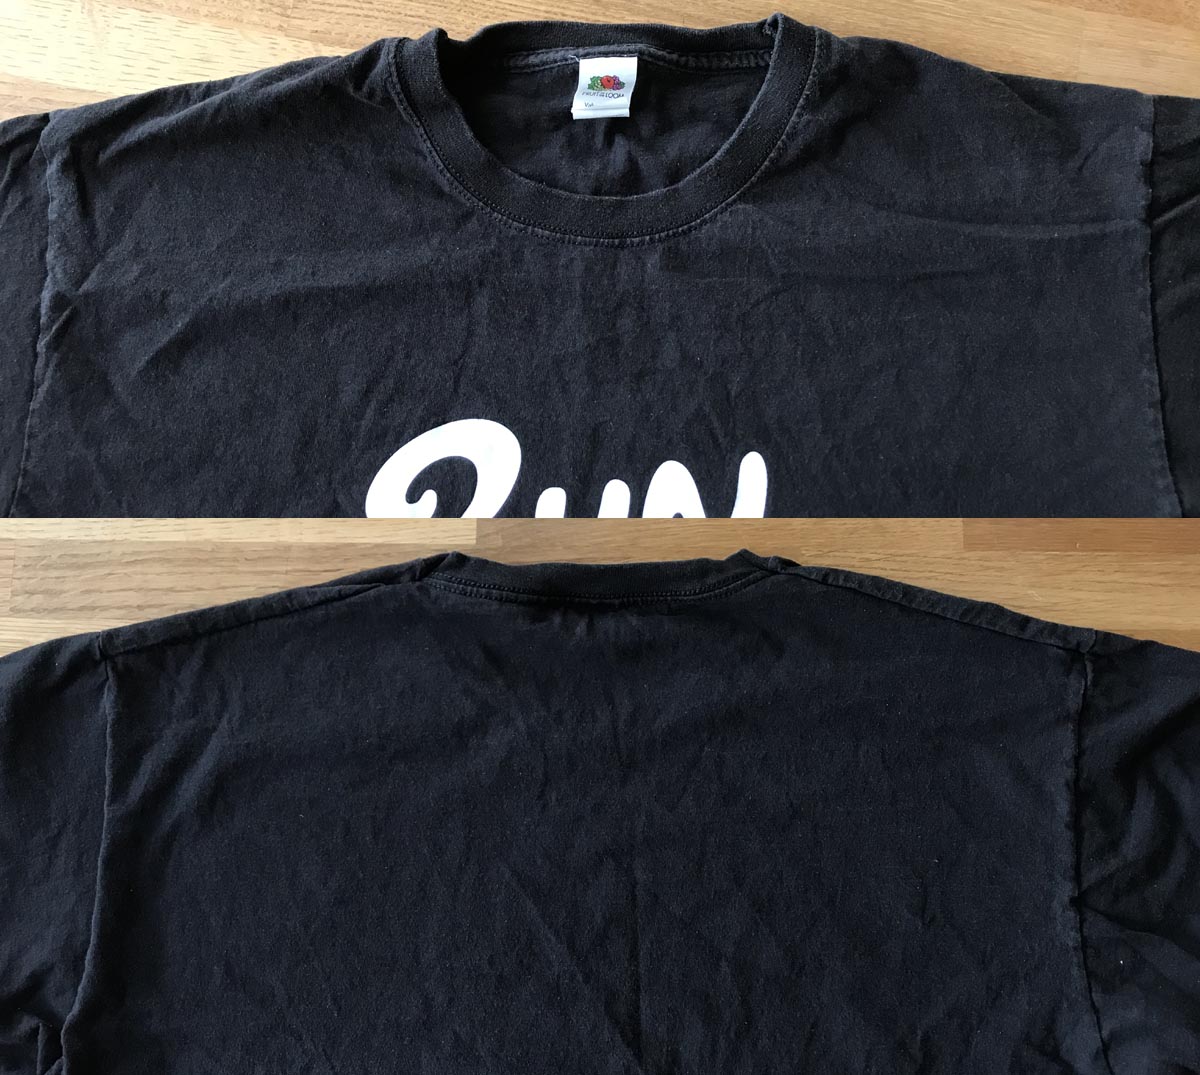 Comparison of neckline on the front and back of the T-shirt, showing front neck as lower than rear